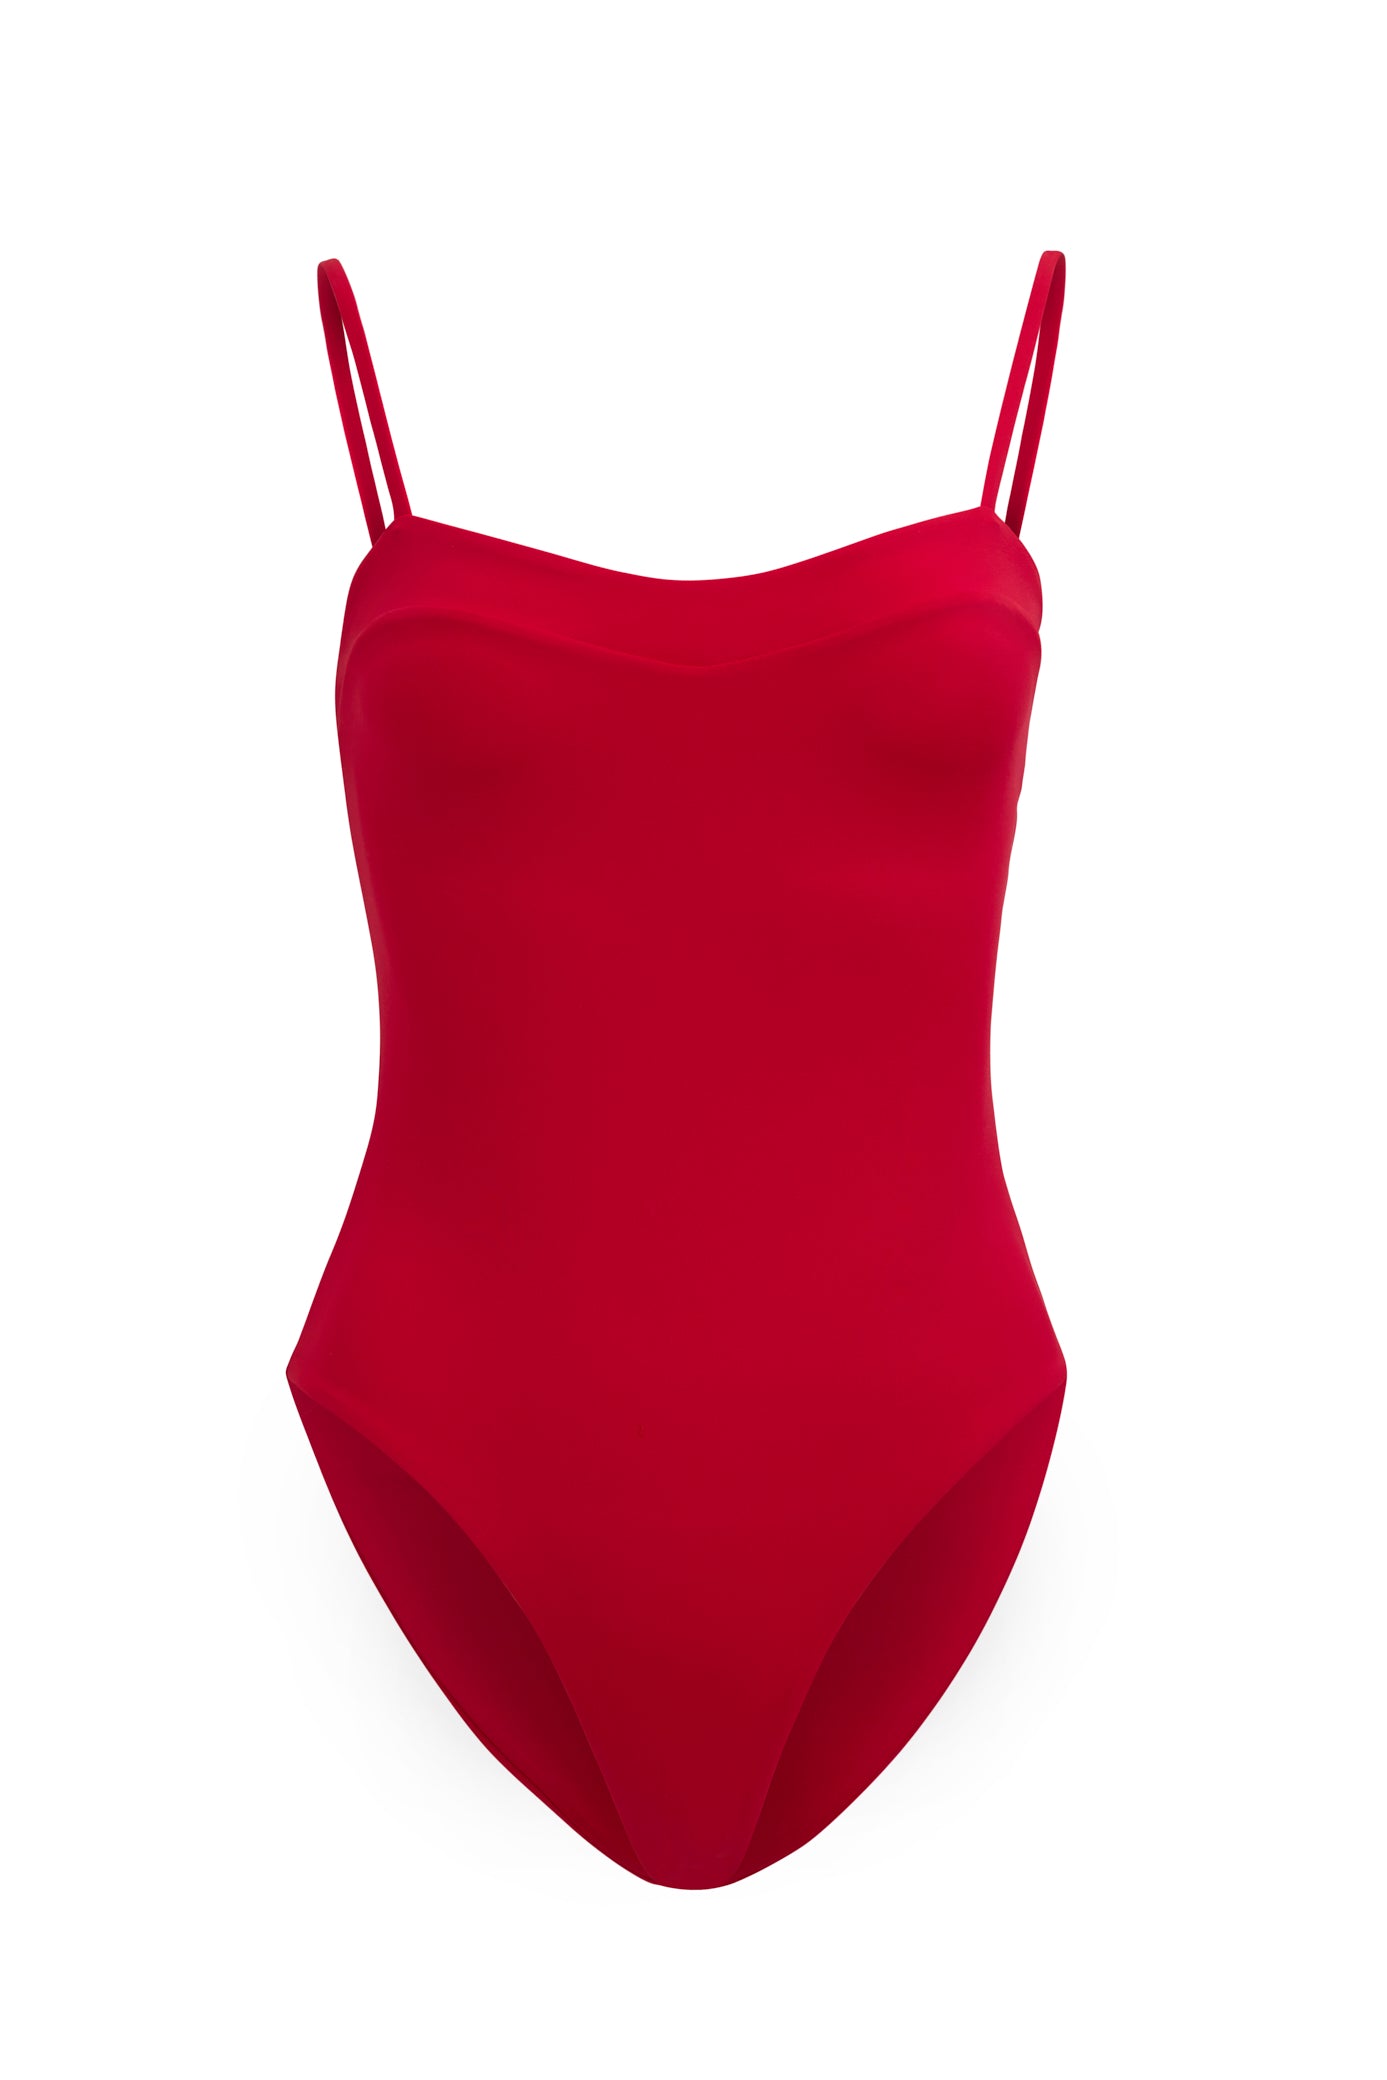 The Cera Suit in Deep Red